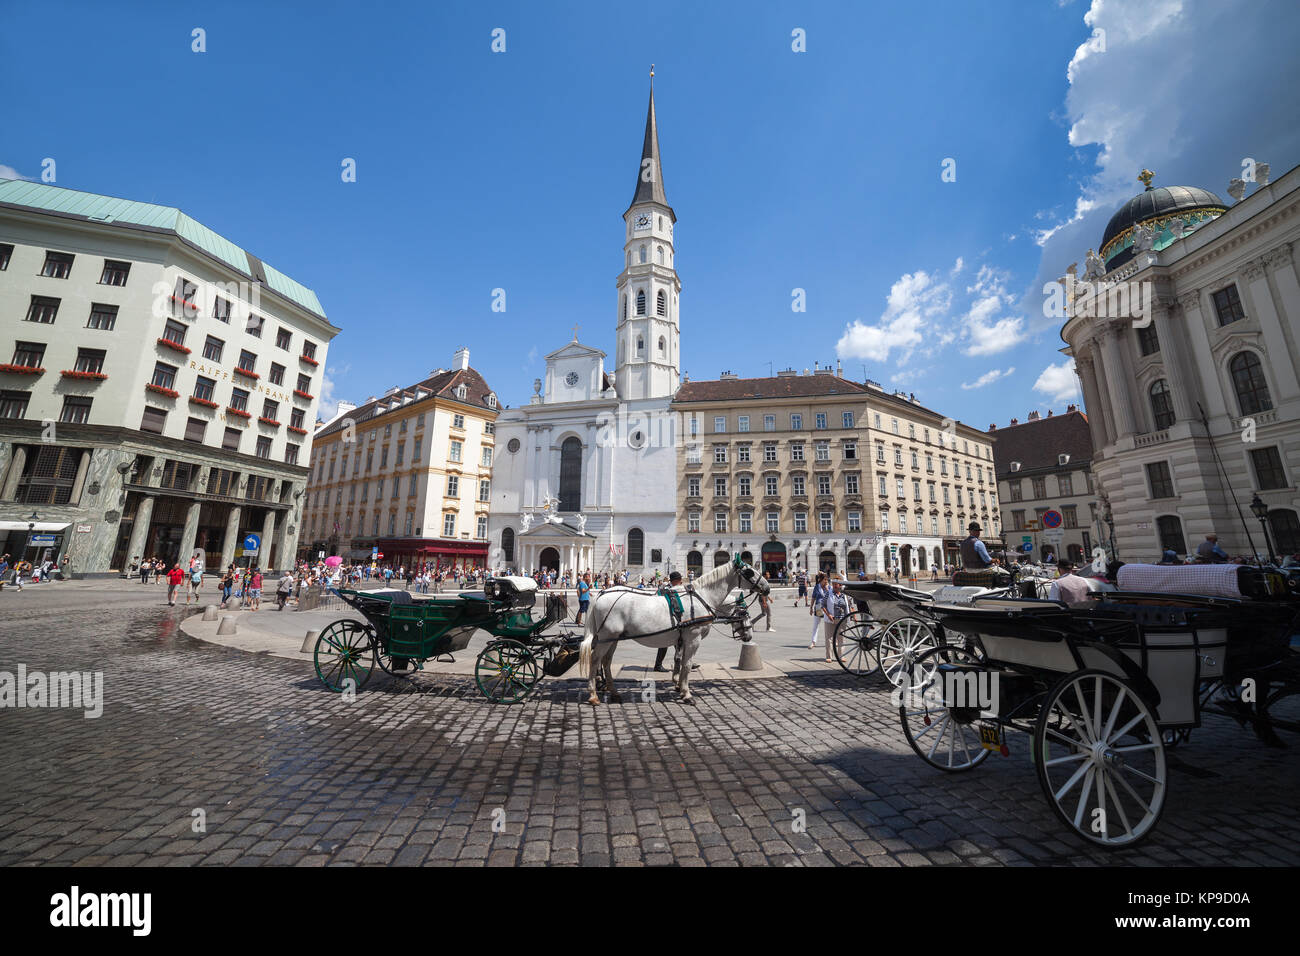 Horse carriages for tourists sightseeing tour on Michaelerplatz - St. Michael's Square in city of Vienna, Austria, Europe Stock Photo